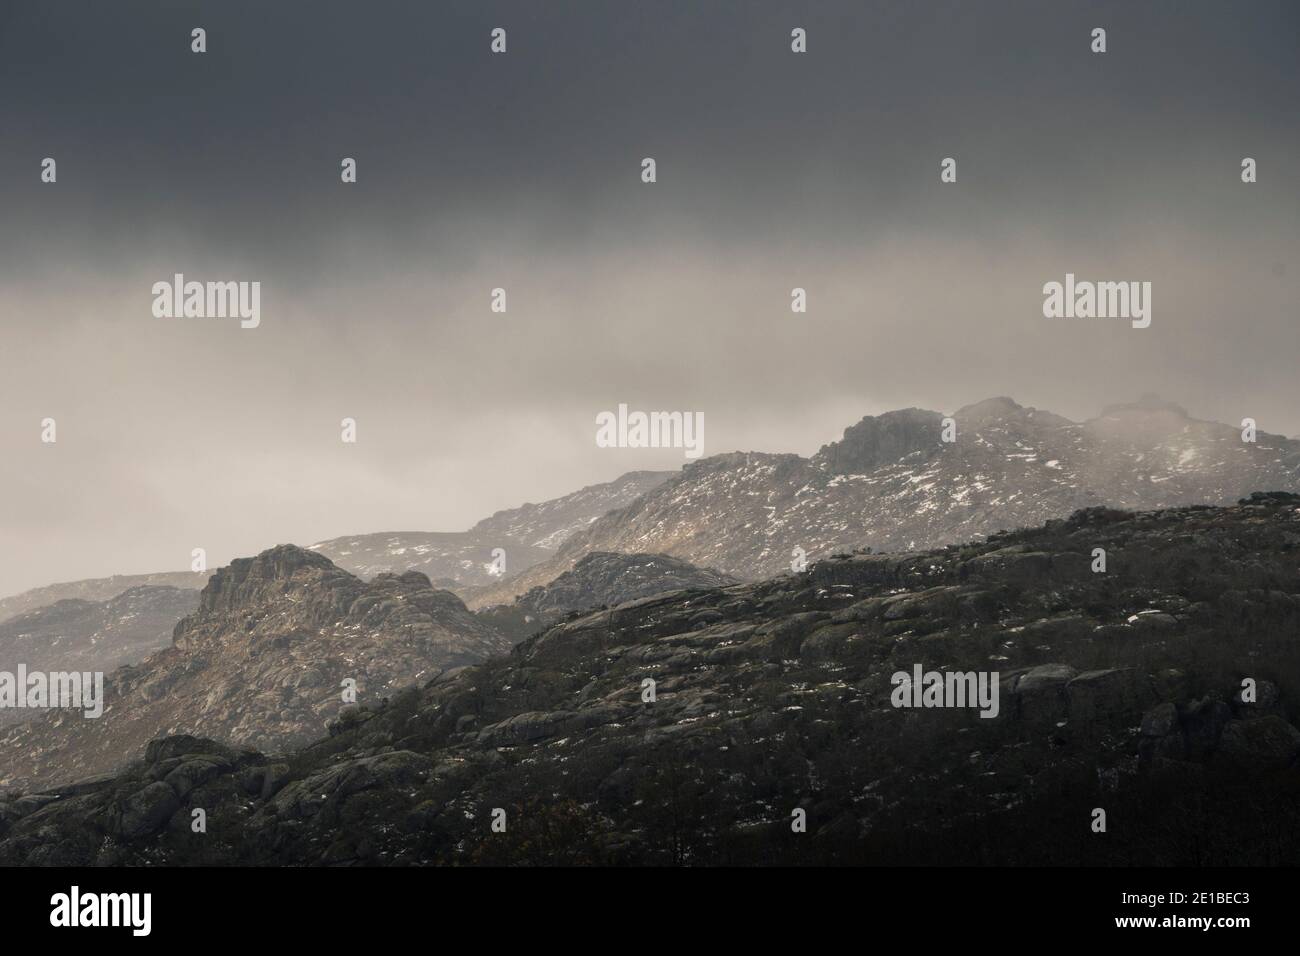 Mountain landscape with snowy capes on a foggy rainy day, as the light enters though the clouds Stock Photo